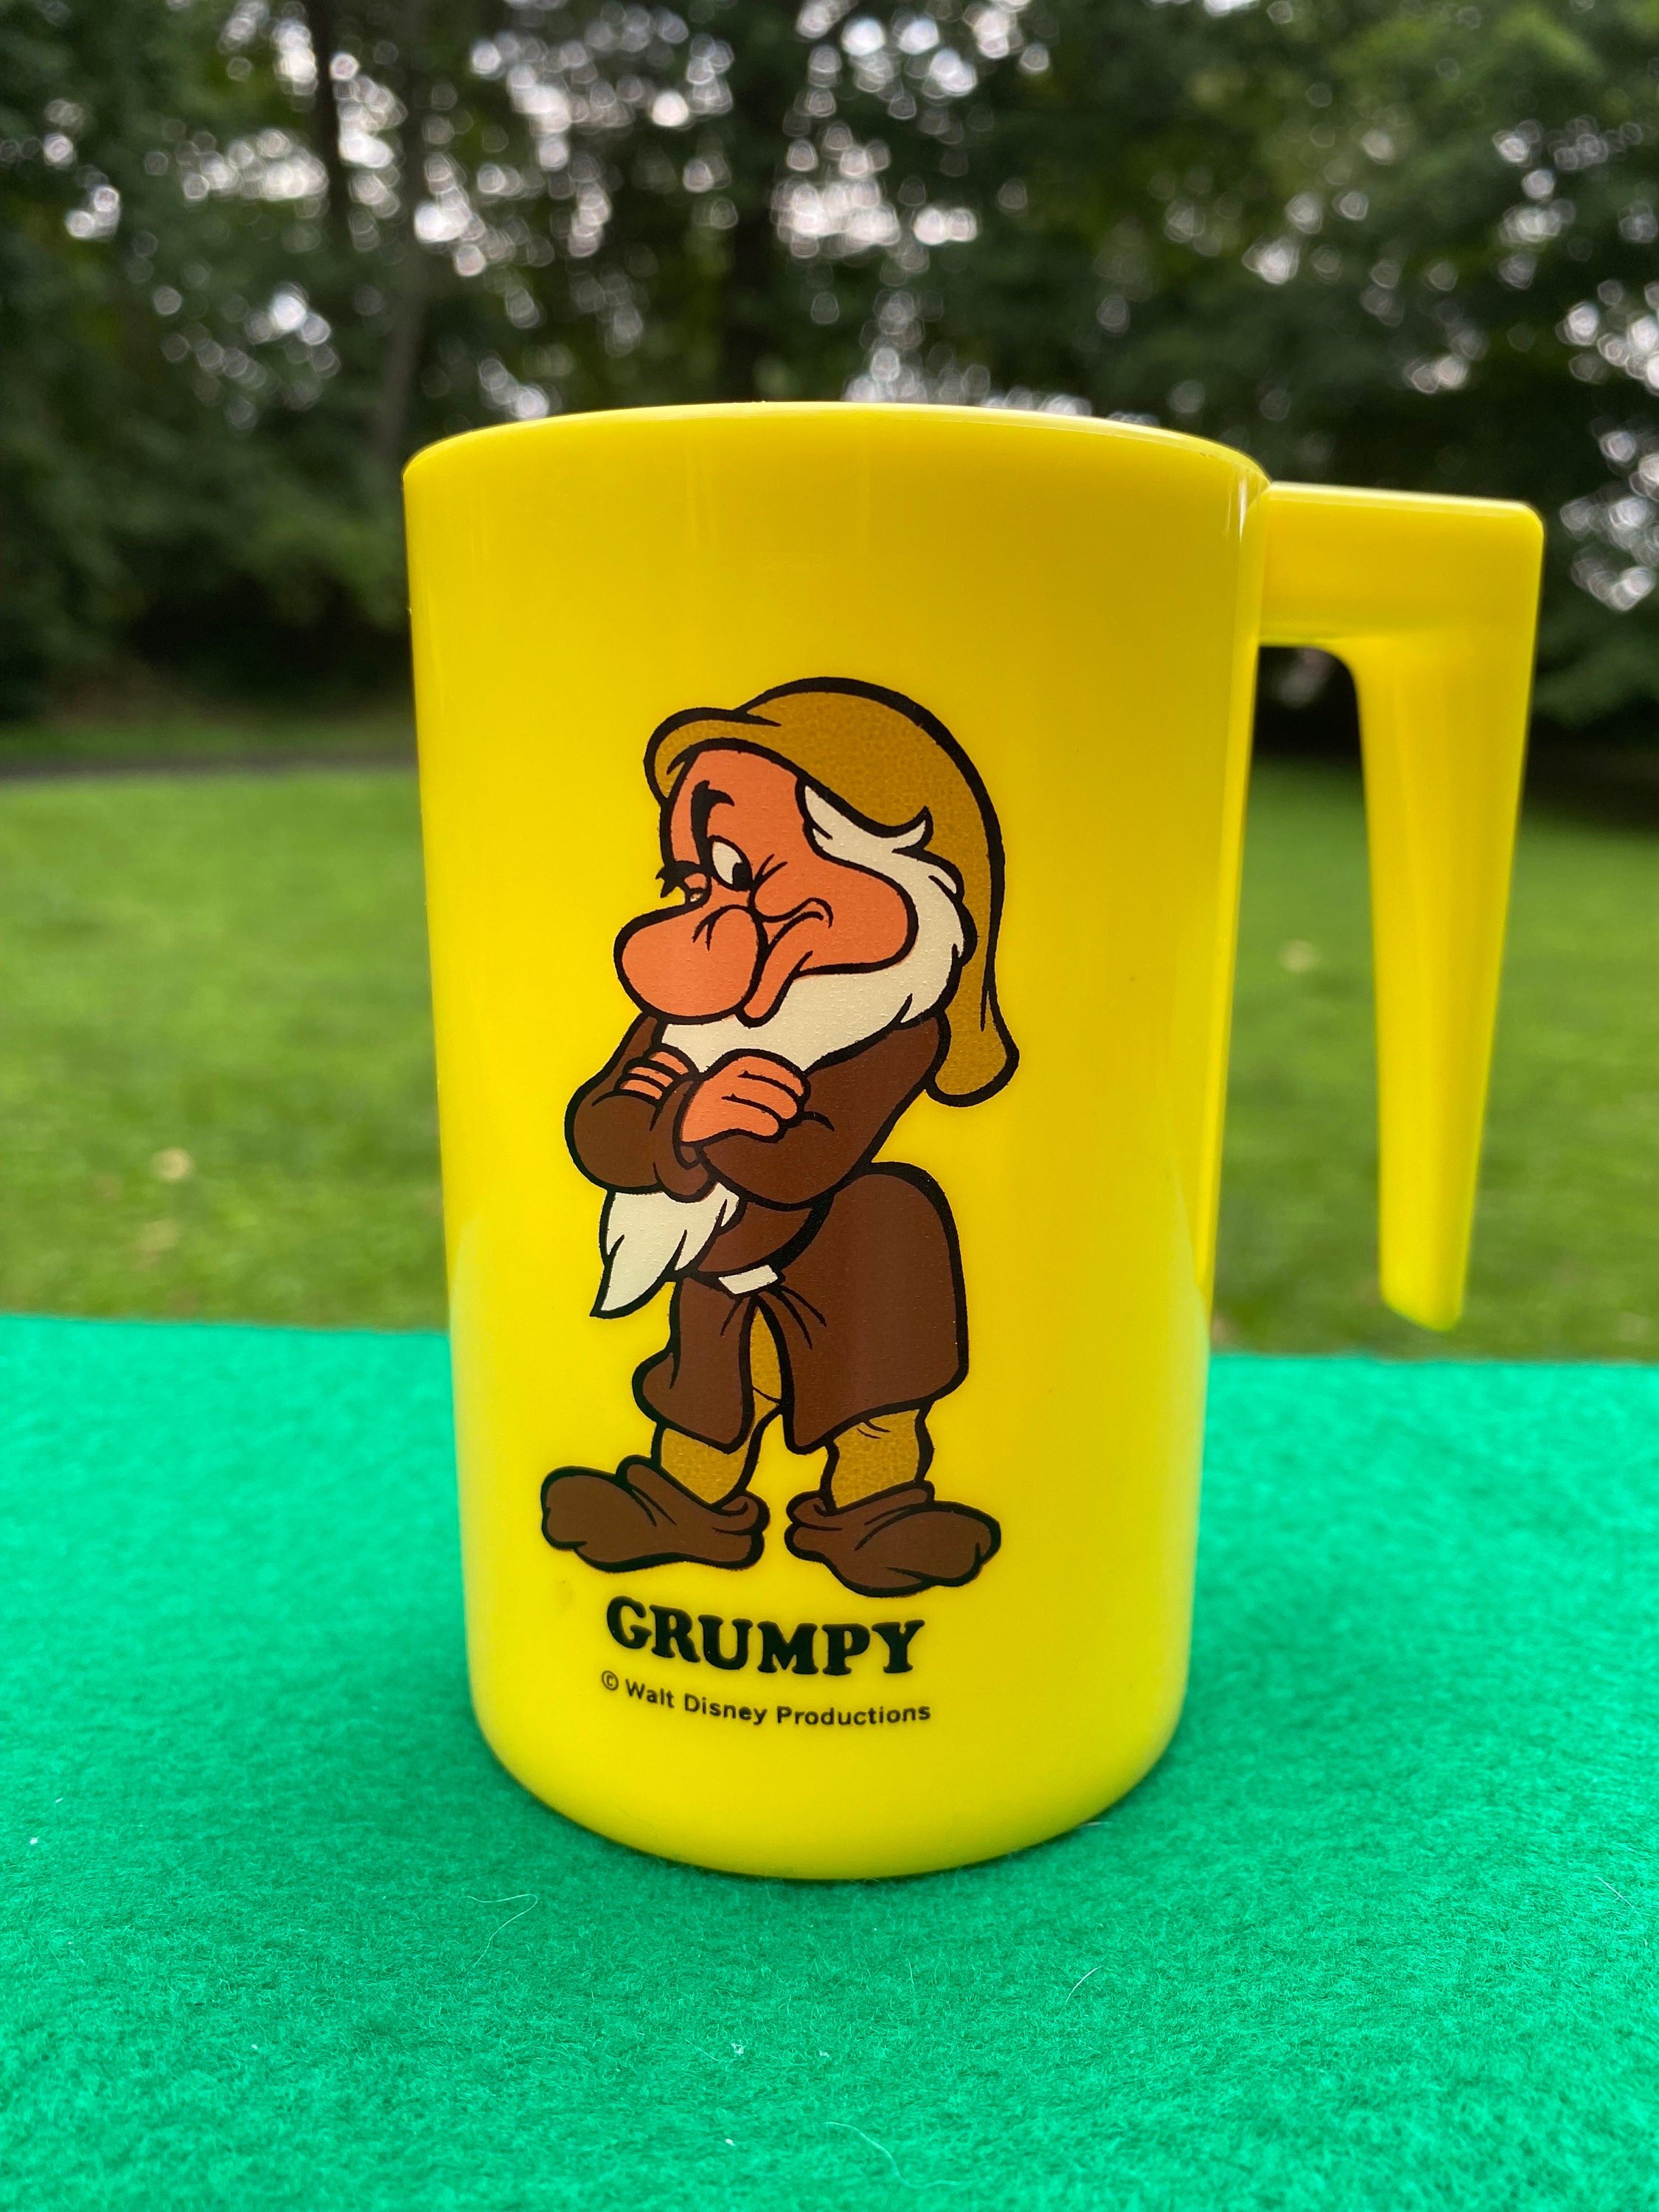 Snow White Plastic Mug Plastic Yellow Cup Disney Child's Cup Adult Cup Walt  Disney Productions, Snow White and the Seven Dwarfs 